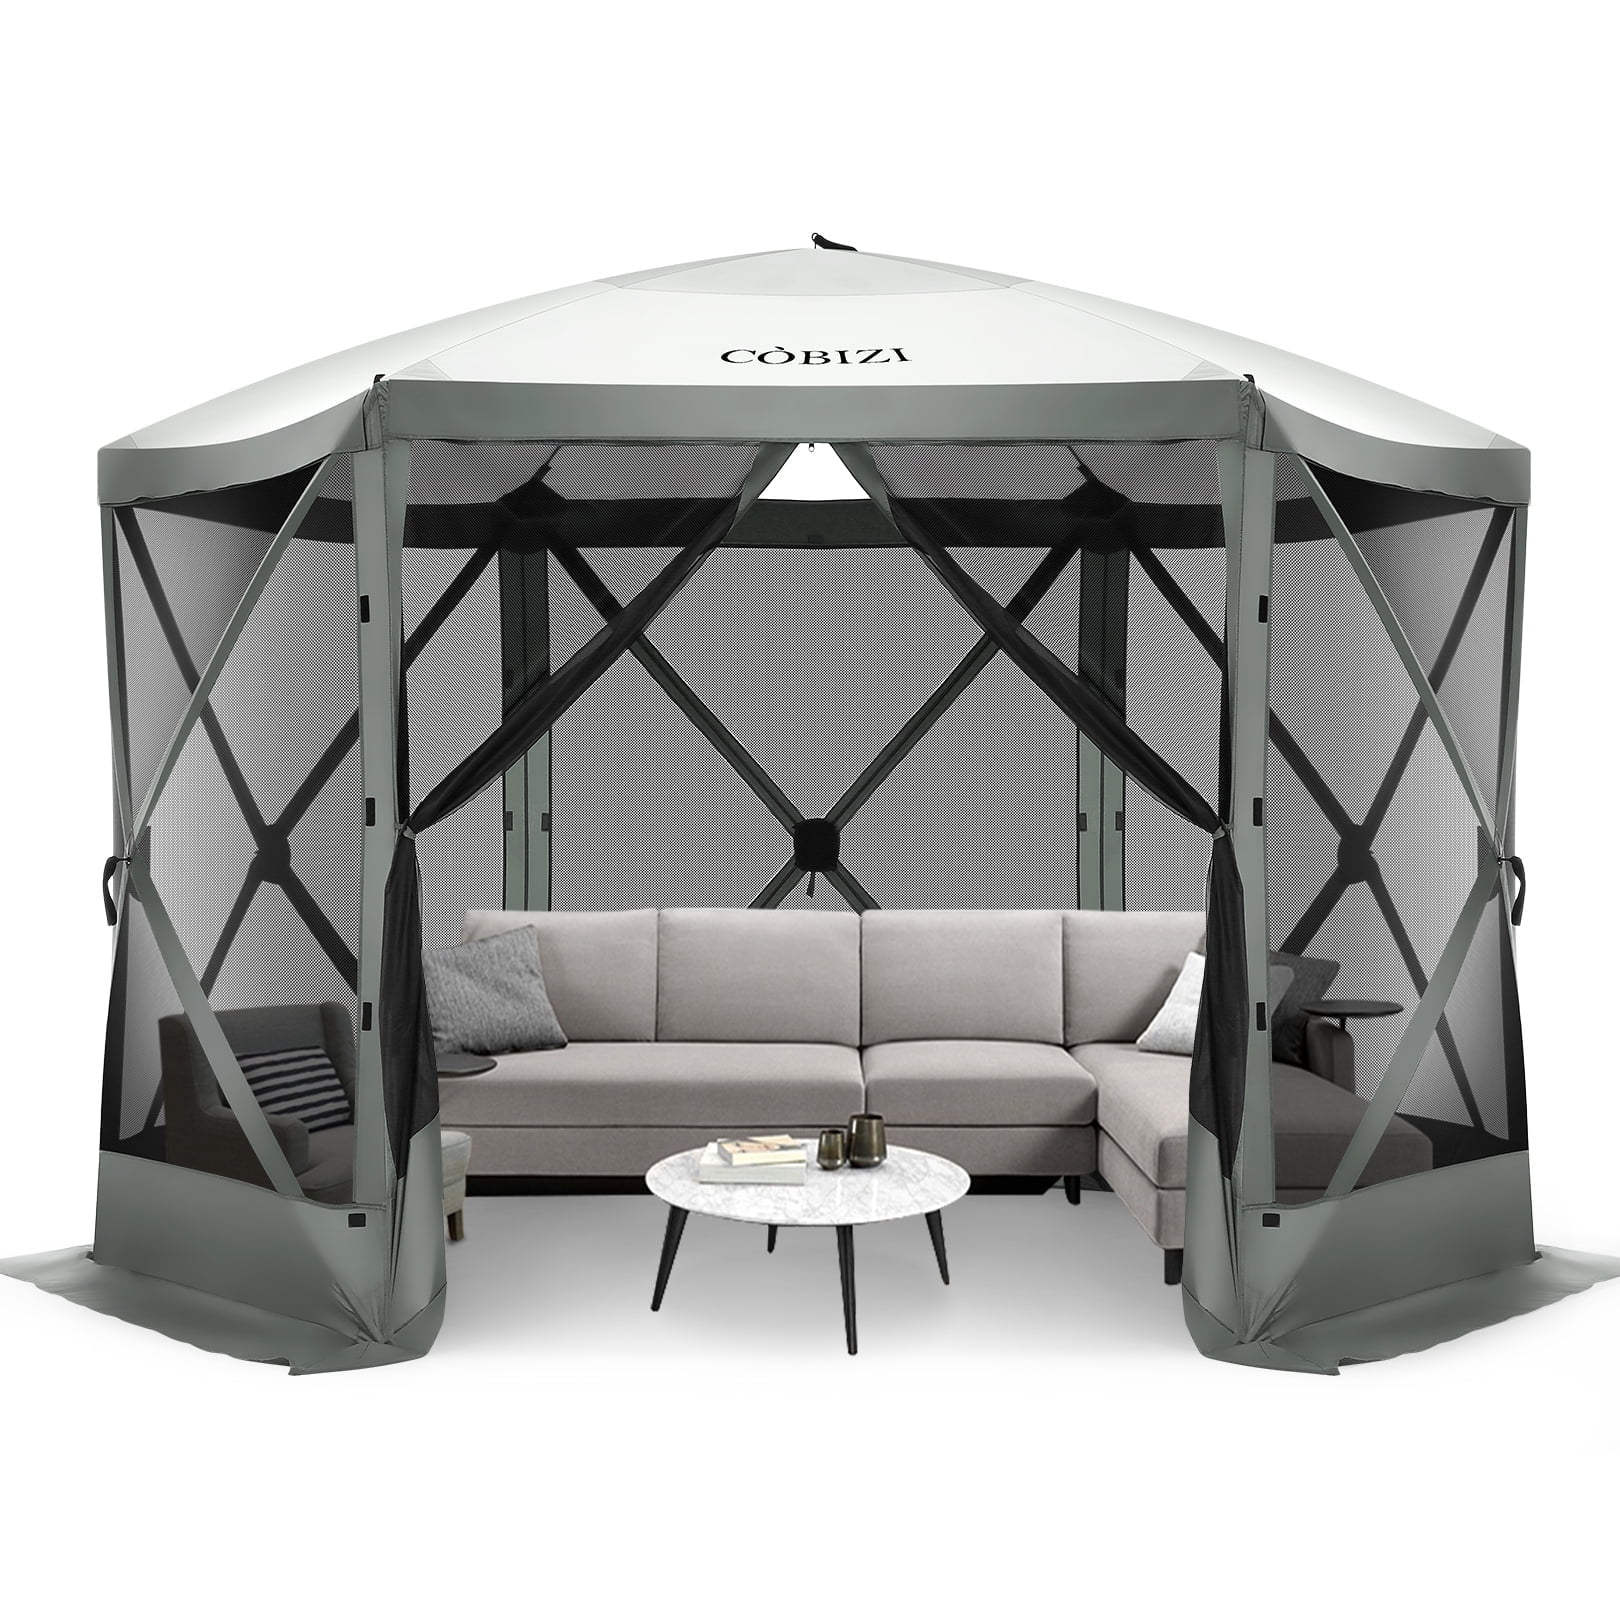 COBIZI 12'x12' Pop-up Gazebo Outdoor Camping Tent with 6 Sides Mosquito Netting, Waterproof, UV Resistant, Portable Screen House Room, Easy Set-up Party Tent with Carry bag, Ground Spike, Gray - Walmart.com